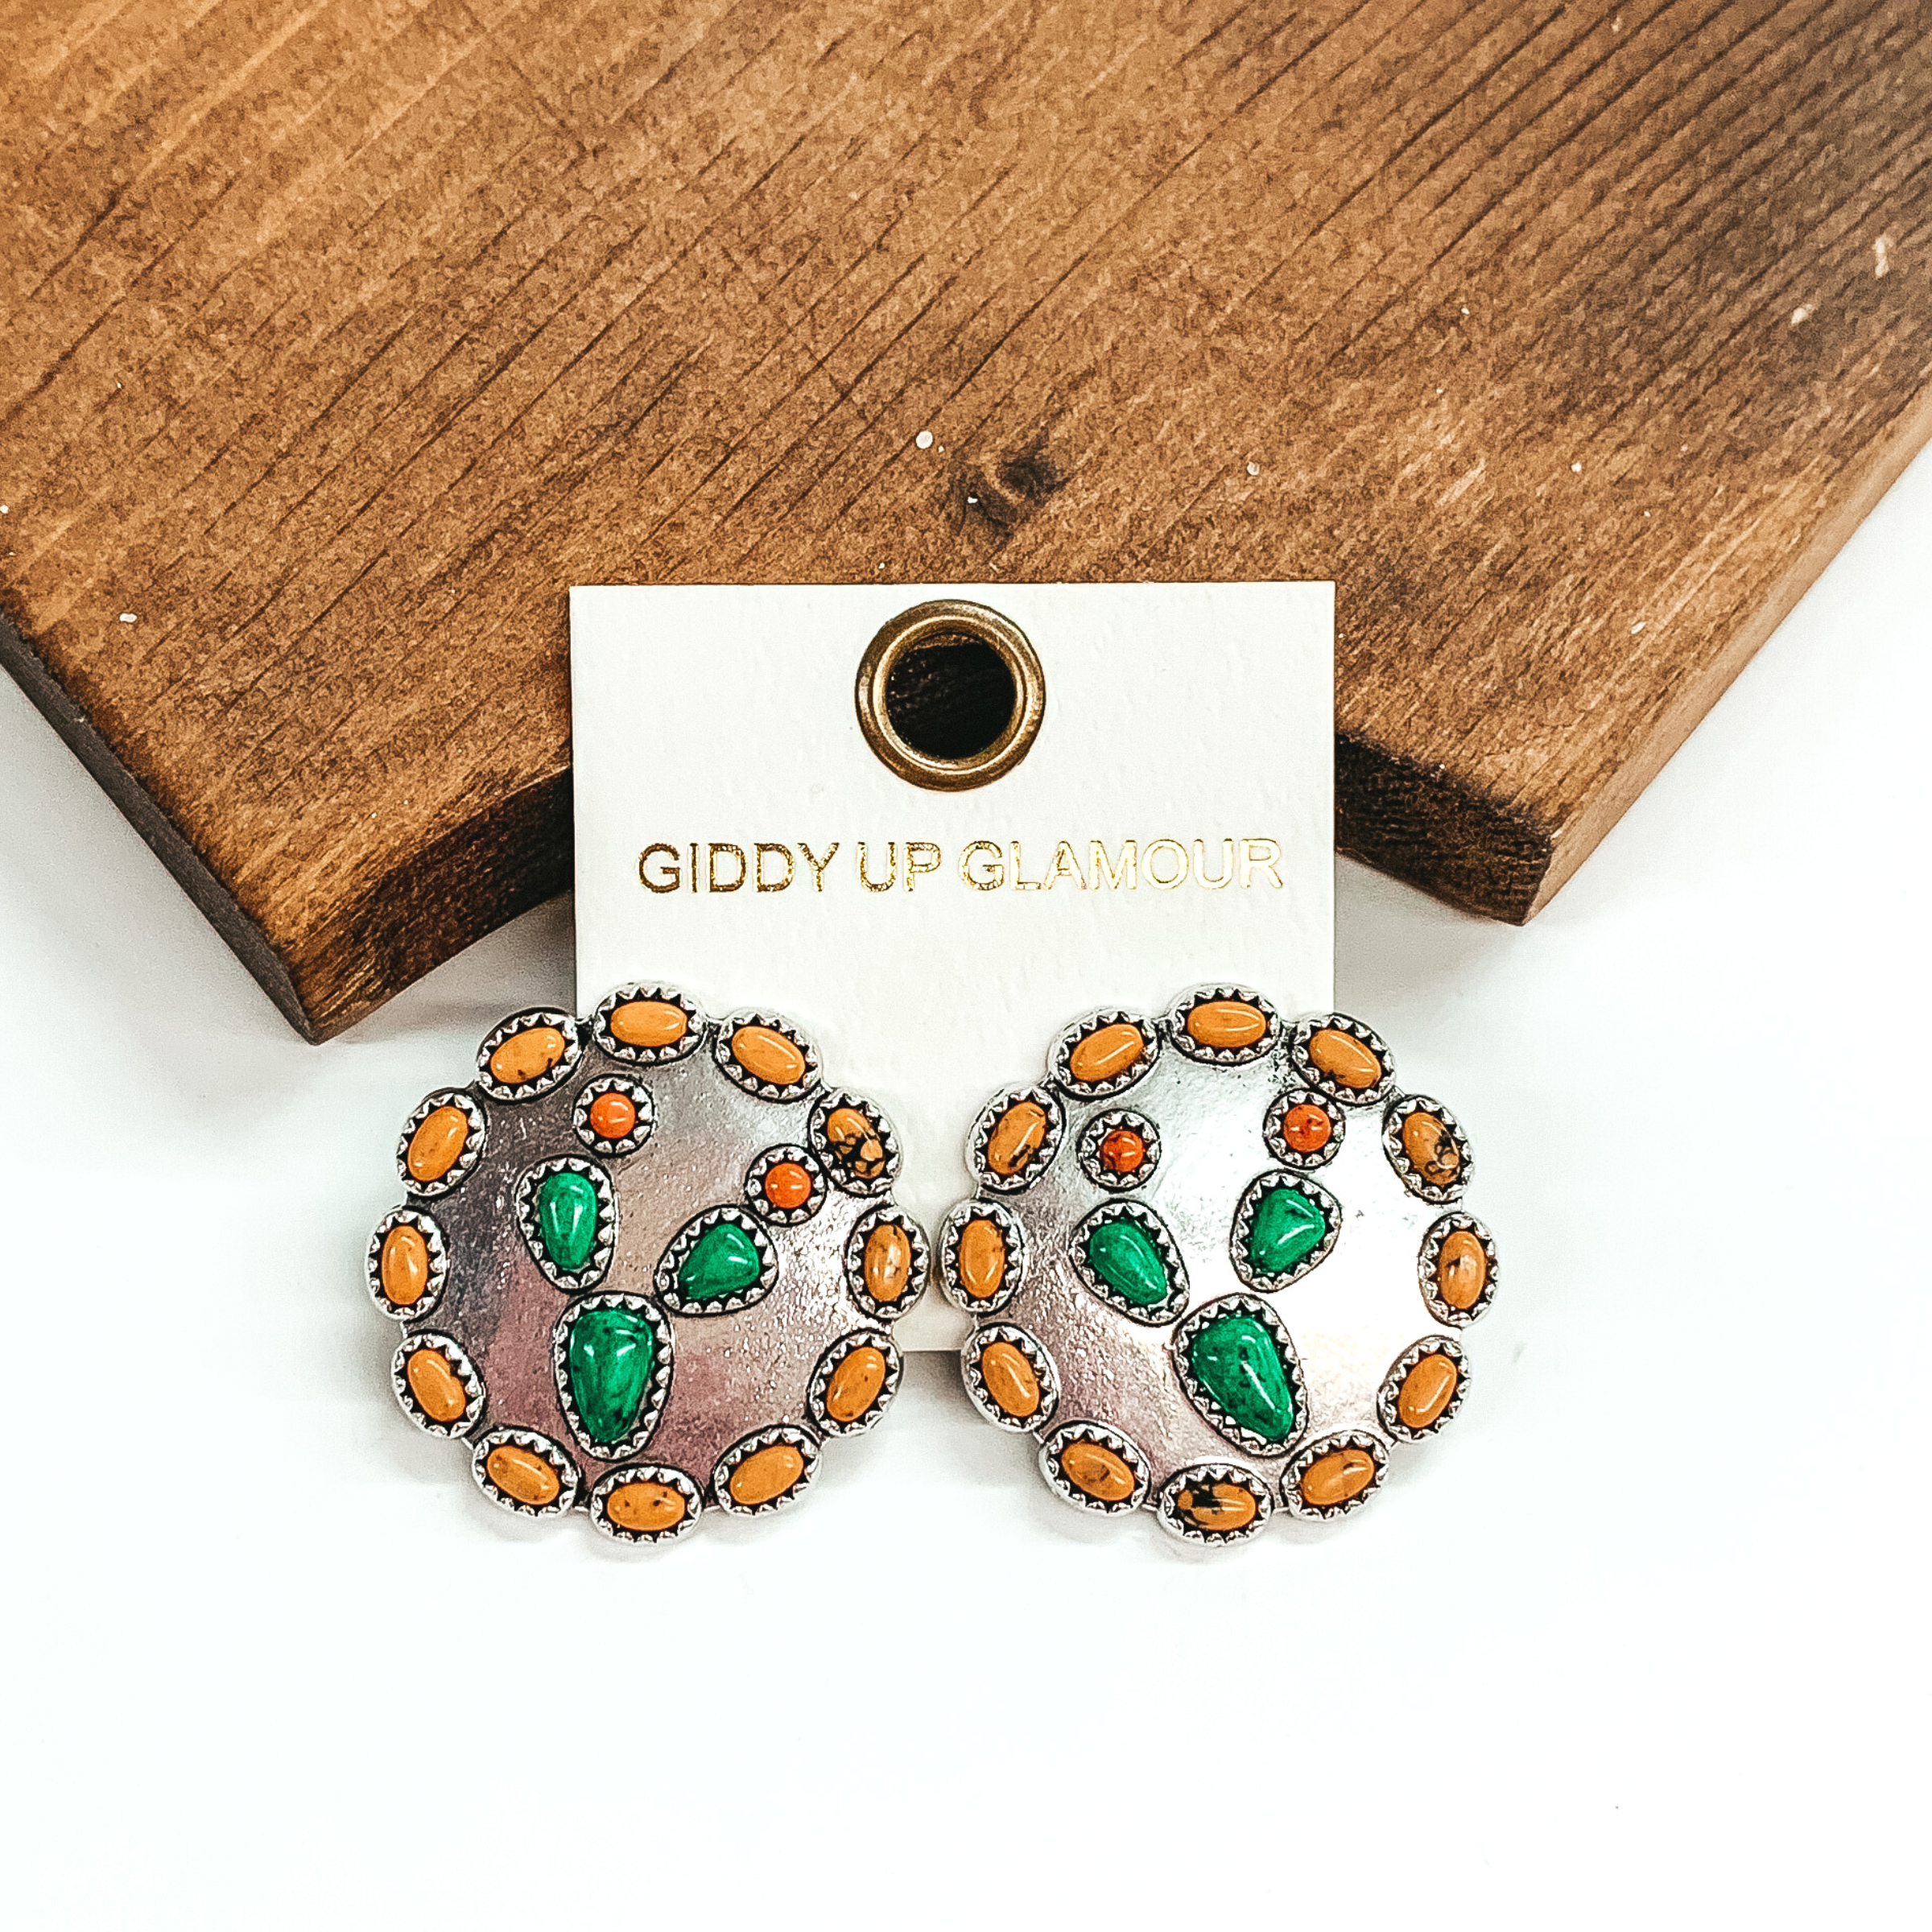 Silver circle earrings that are outlined in yellow stones and has a center green stone cactus. These earrings are pictured leaning against a brown block on a white background.